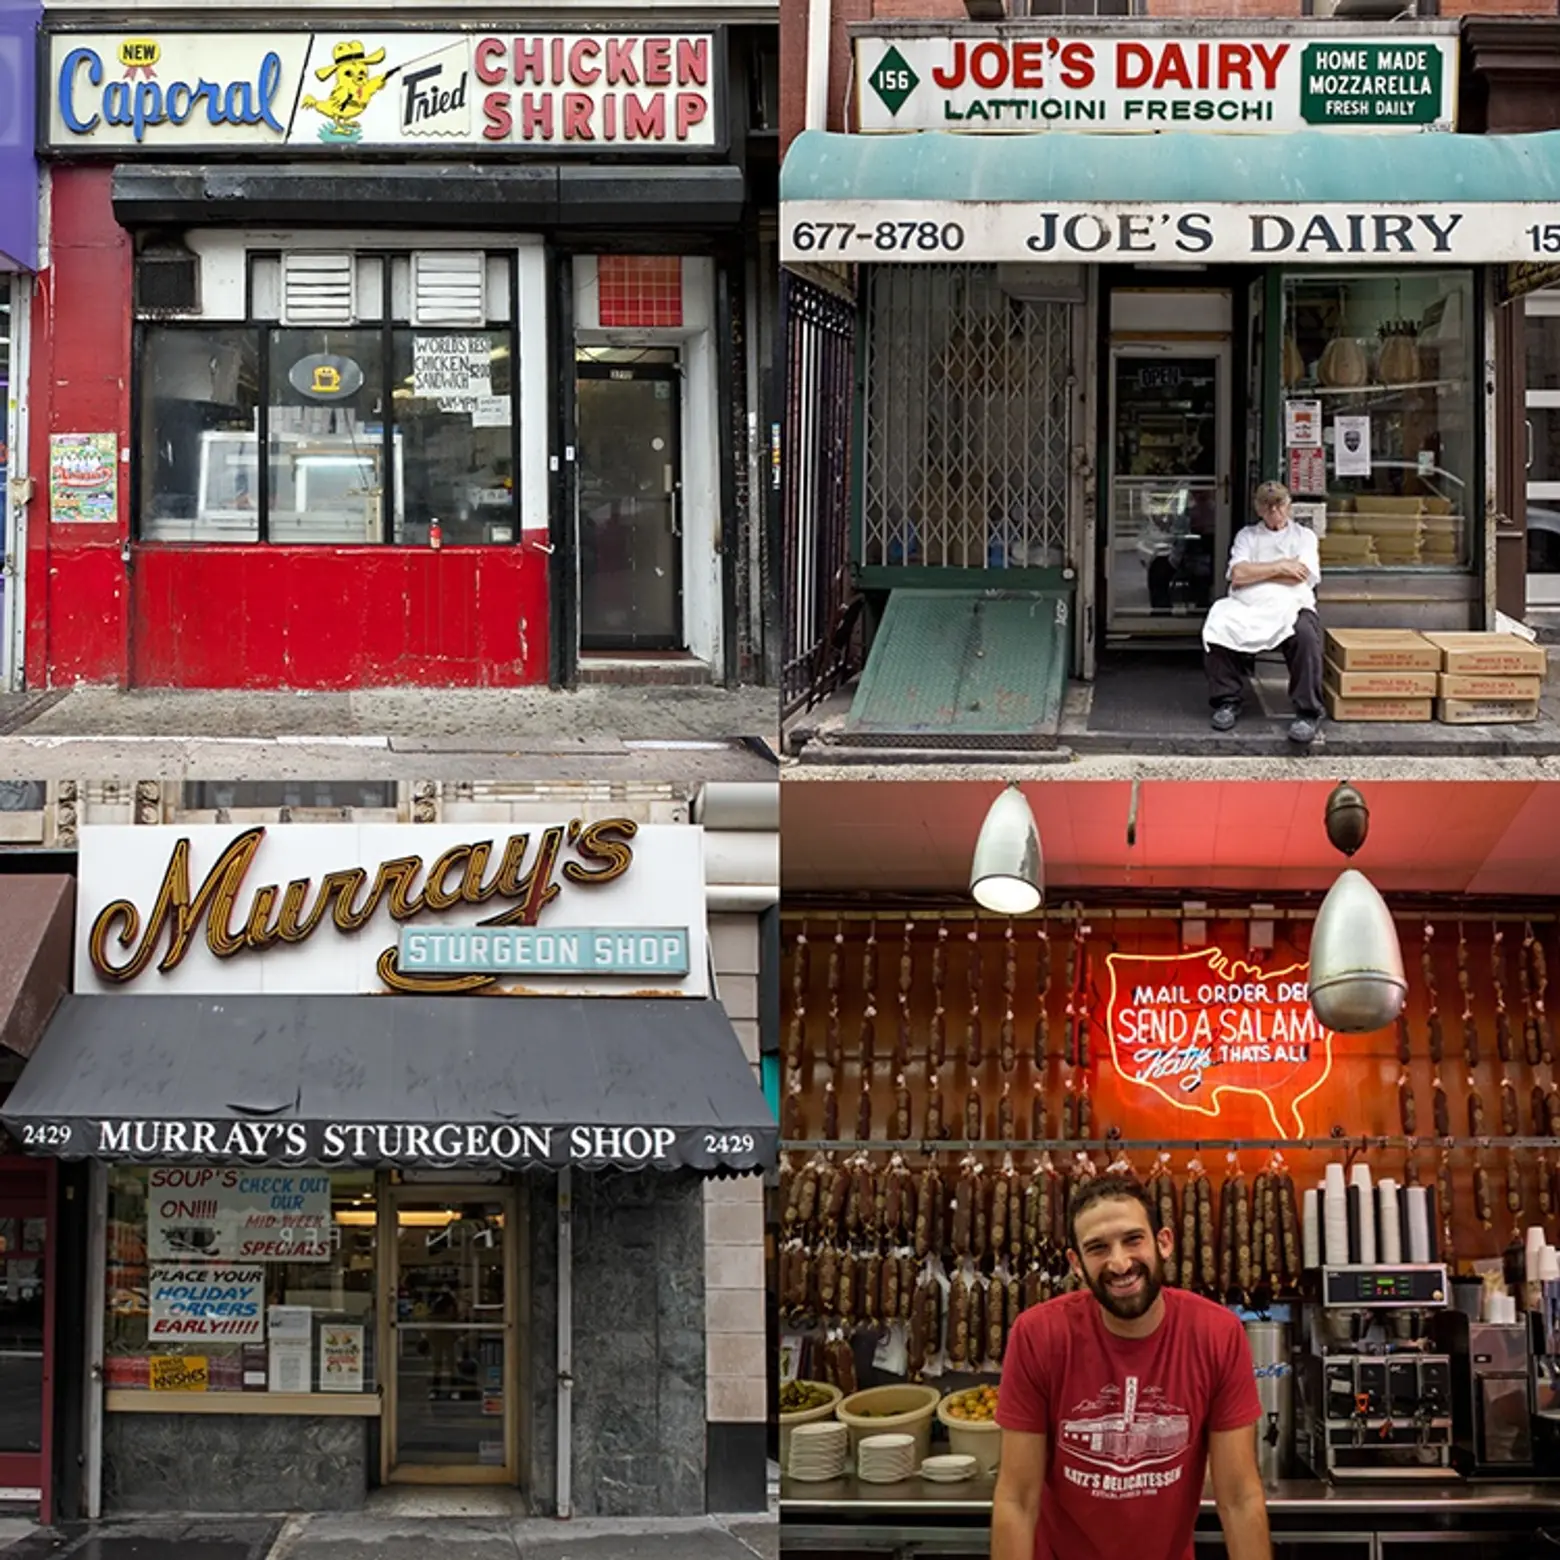 Explore ‘faces and voices’ of Manhattan storefronts with new exhibit from James and Karla Murray